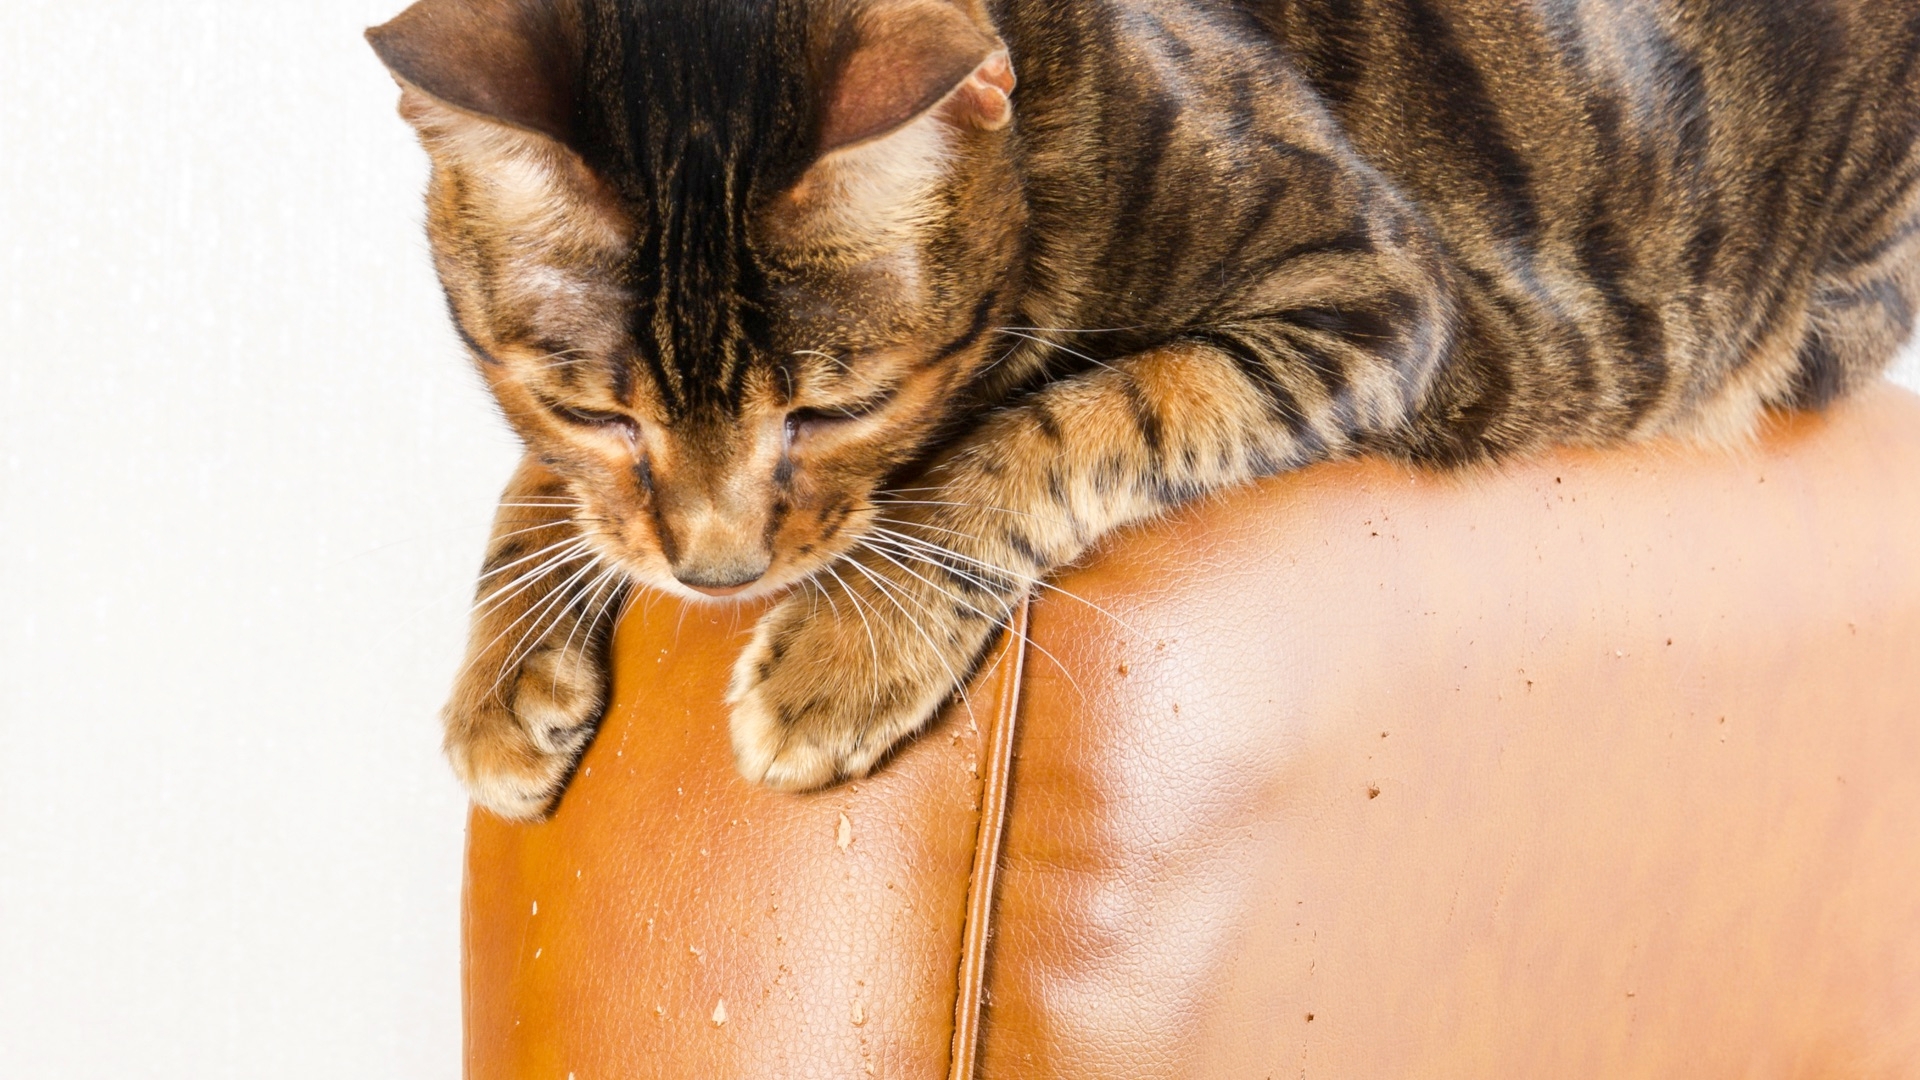 Does Your Cat Scratch The Furniture?